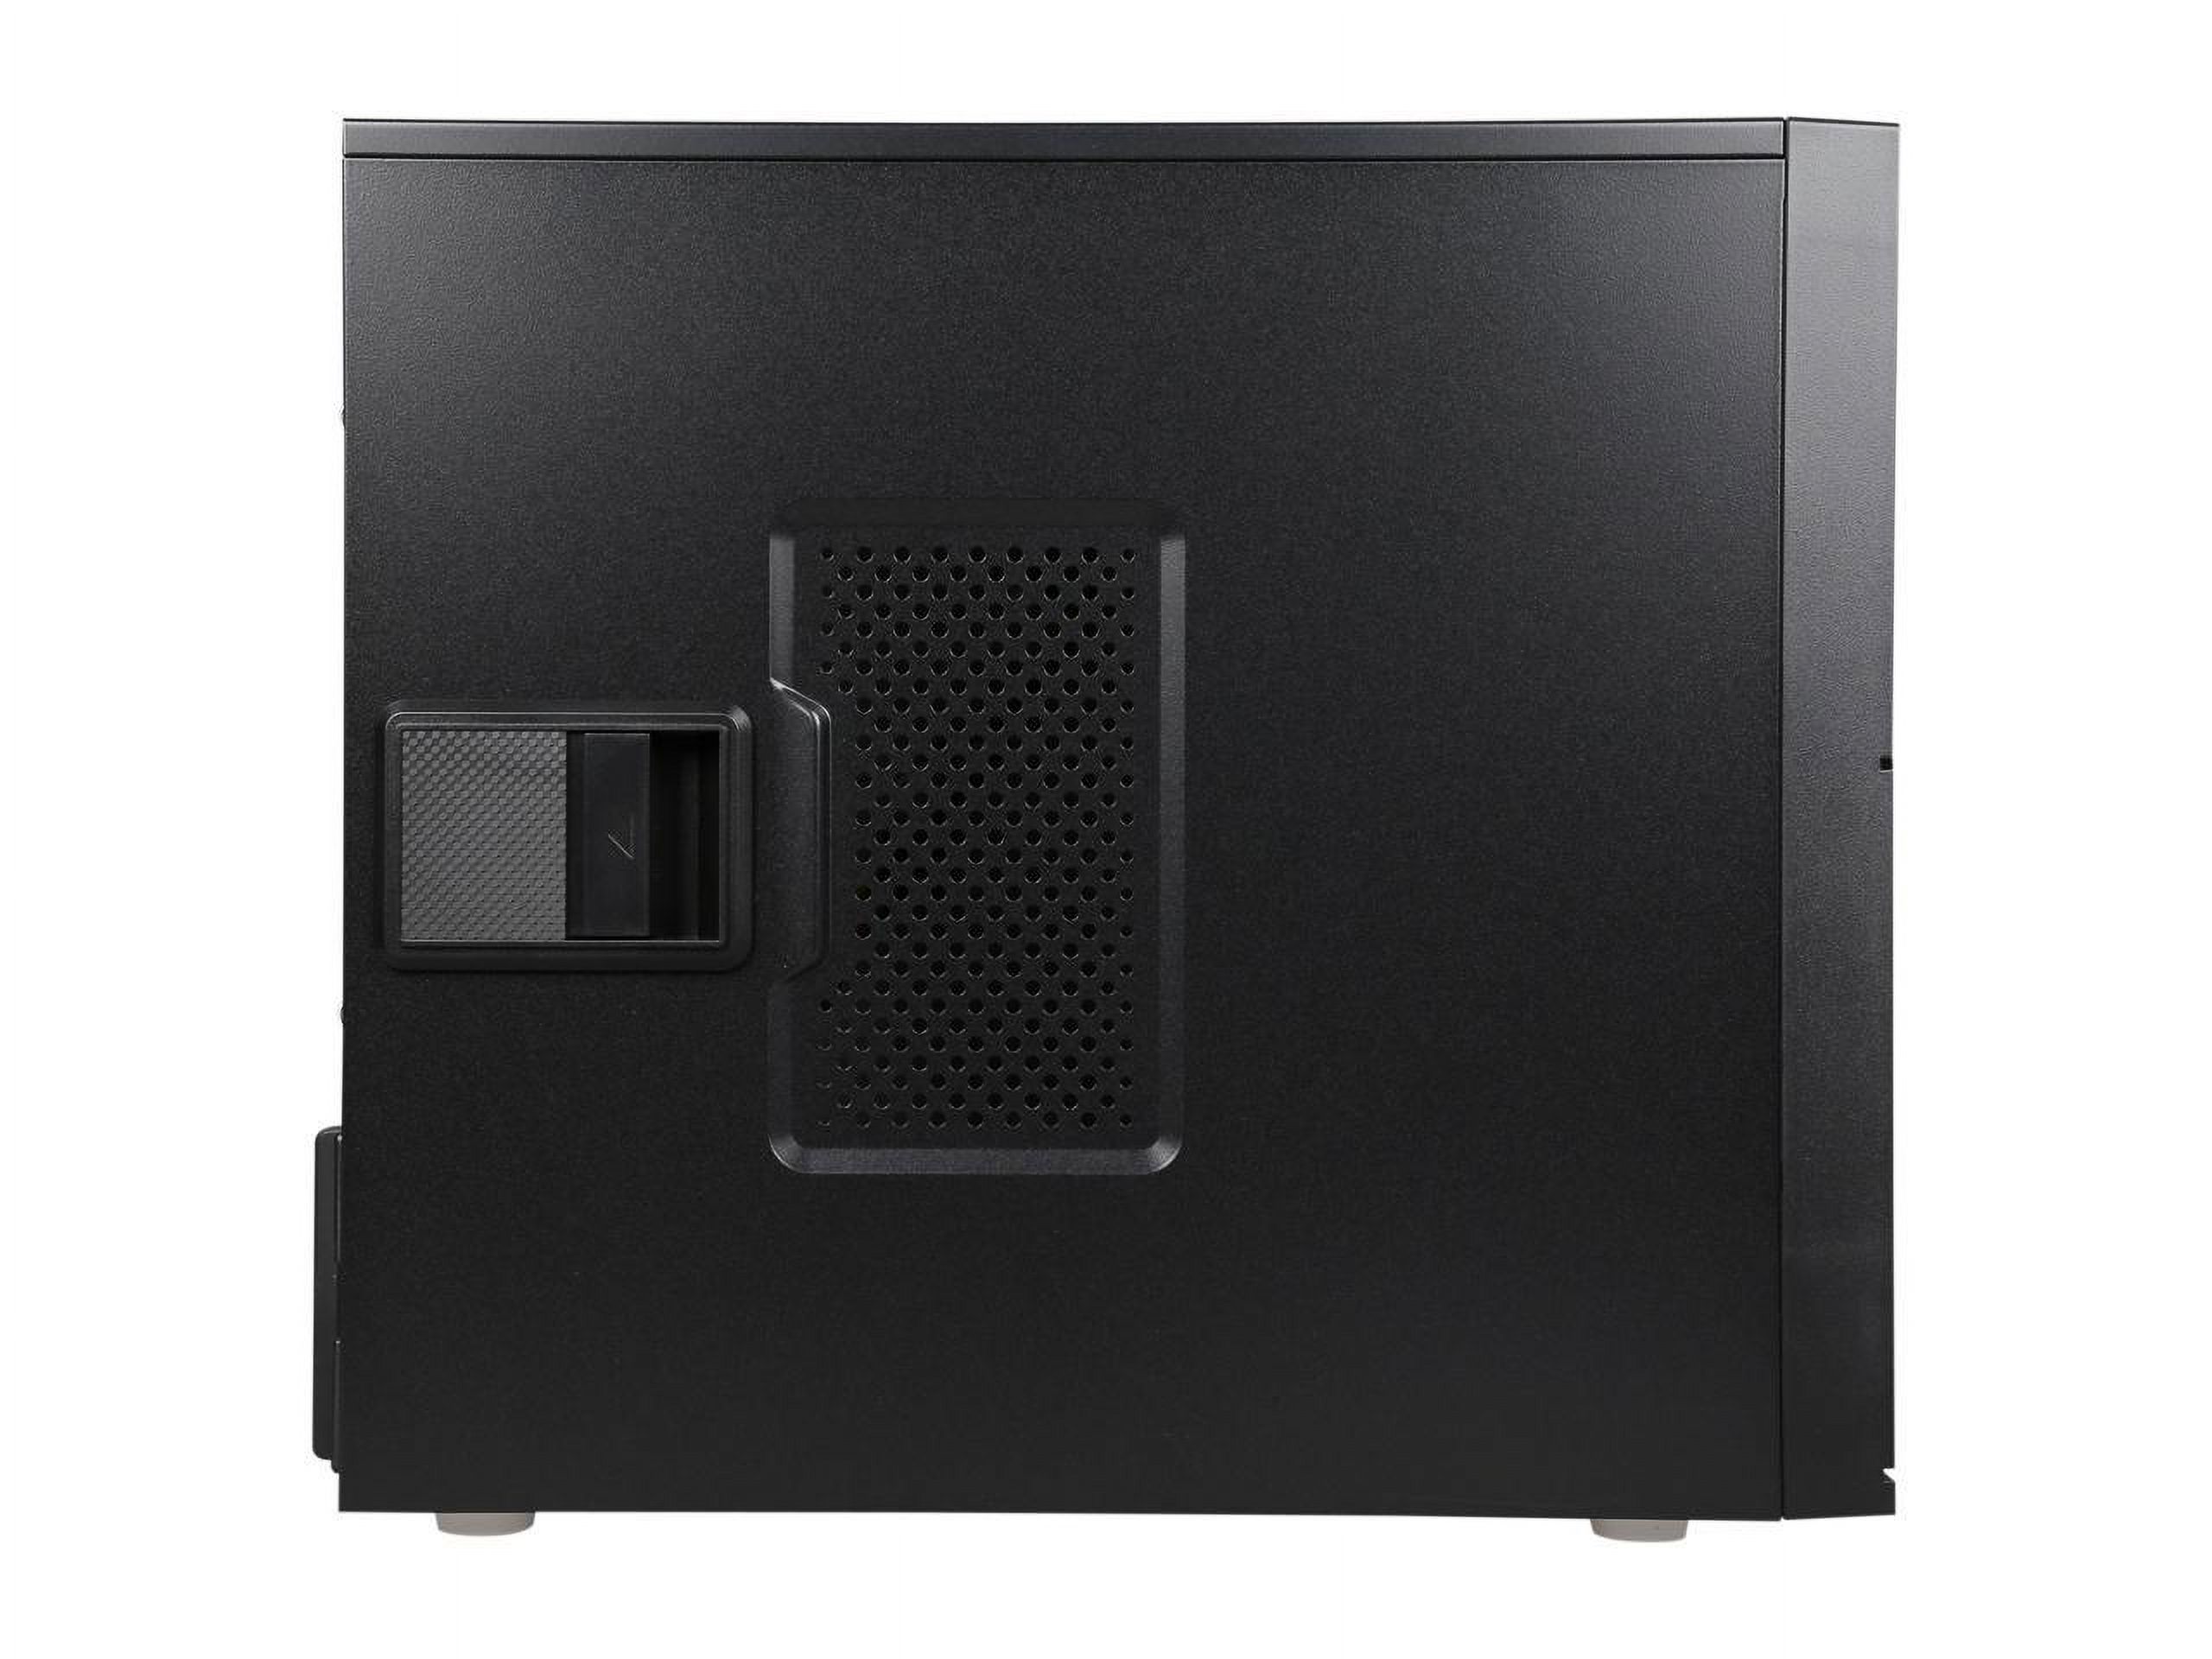 IN WIN EFS052.CH450TB3 Black Mini Tower Computer Case MicroATX 12V Form Factor, PSII Size Power Supply - image 4 of 9